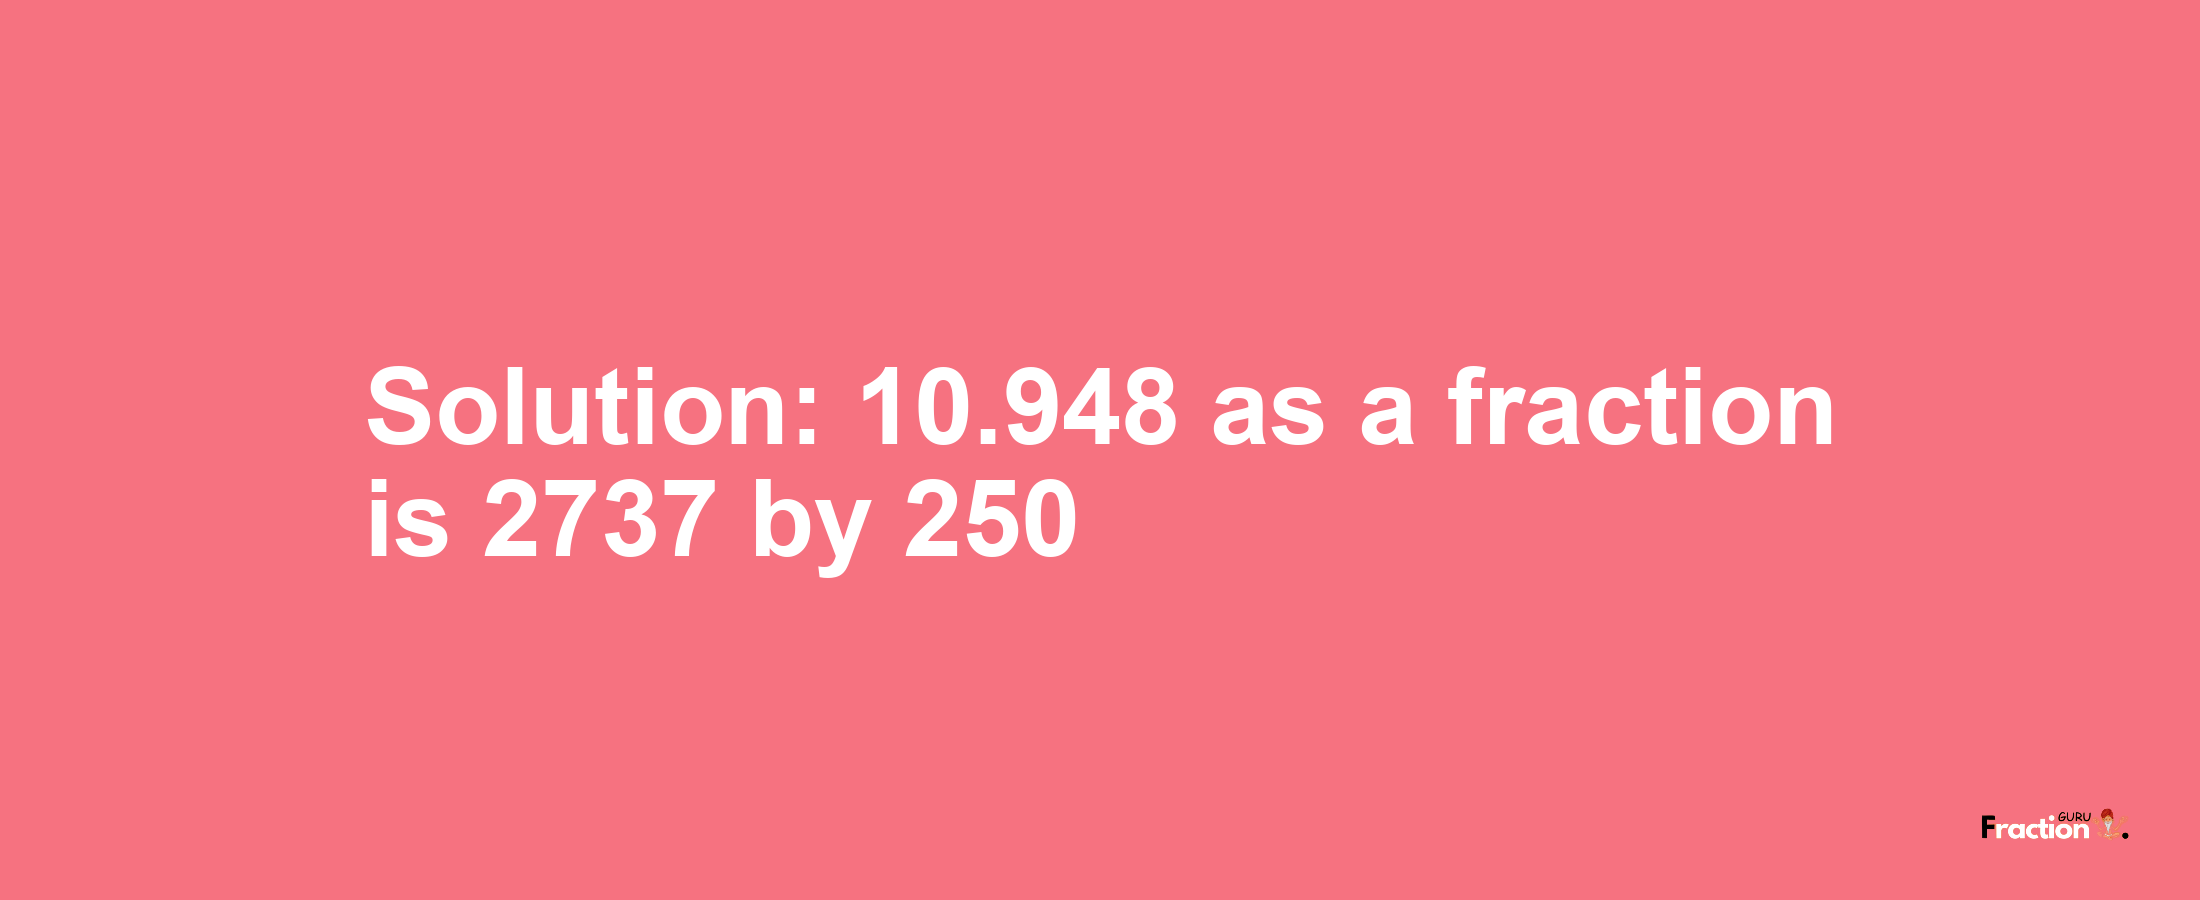 Solution:10.948 as a fraction is 2737/250